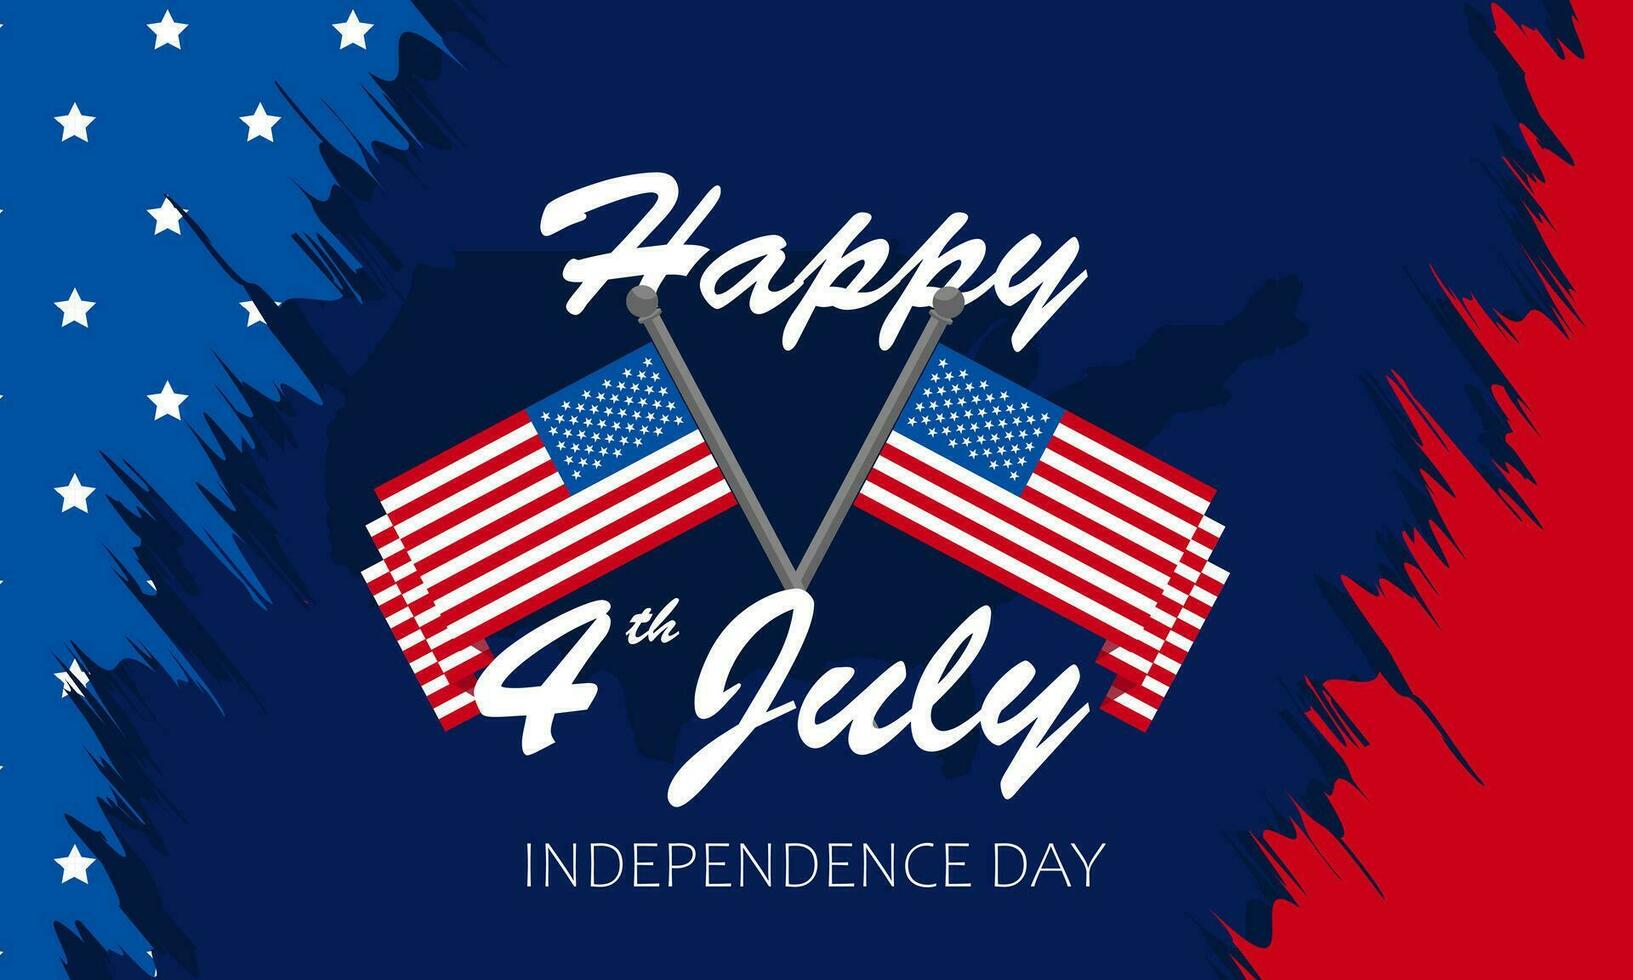 USA or United States of America independence day banner for 4th of July. Vector illustration